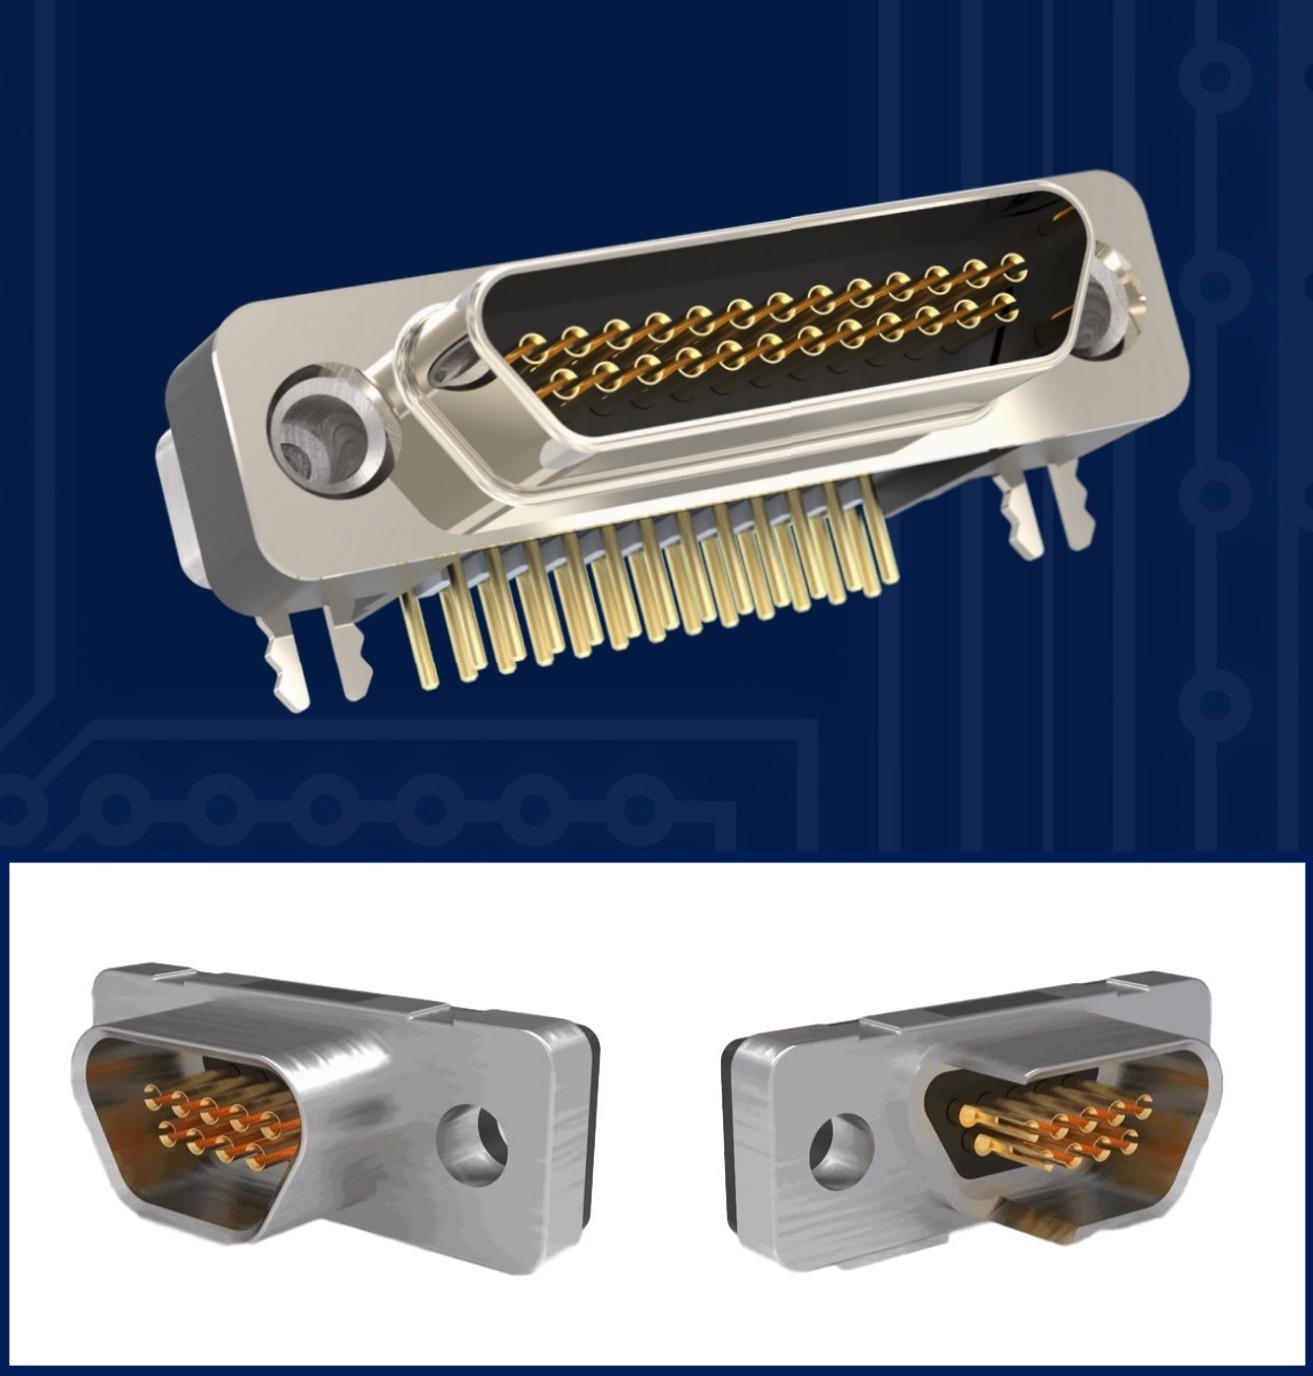 NorComp MICRO-D Series machined, microminiature connectors